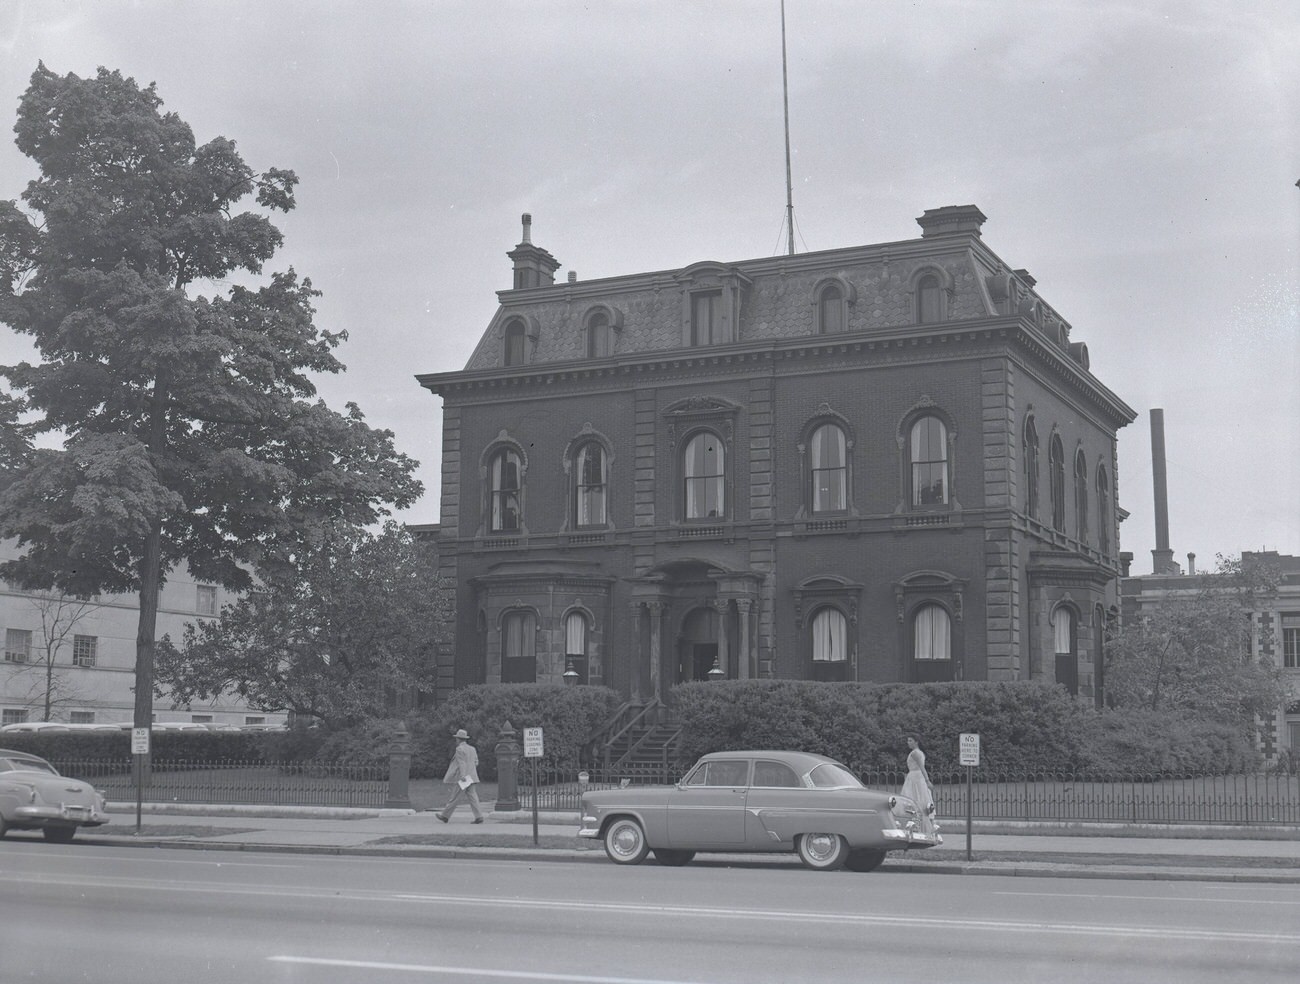 Columbus Club exterior, located on southeast corner of East Broad Street and South Fourth Street, building originally constructed circa 1870, bought by Columbus Club in 1887, photograph from 1955.